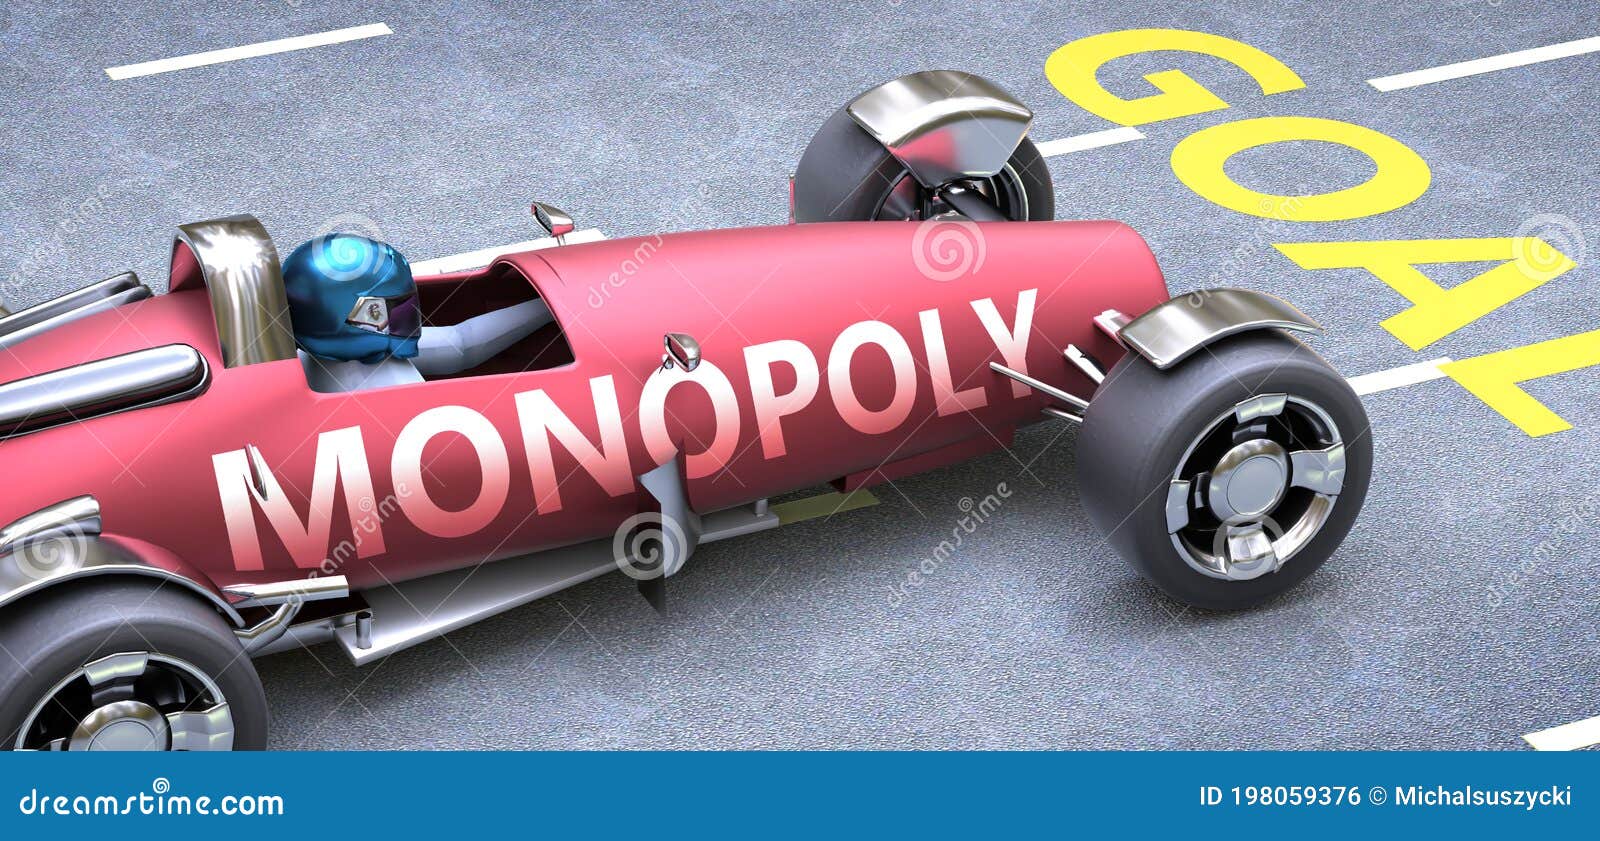 Monopoly Helps Reaching Goals, Pictured As a Race Car with a Phrase